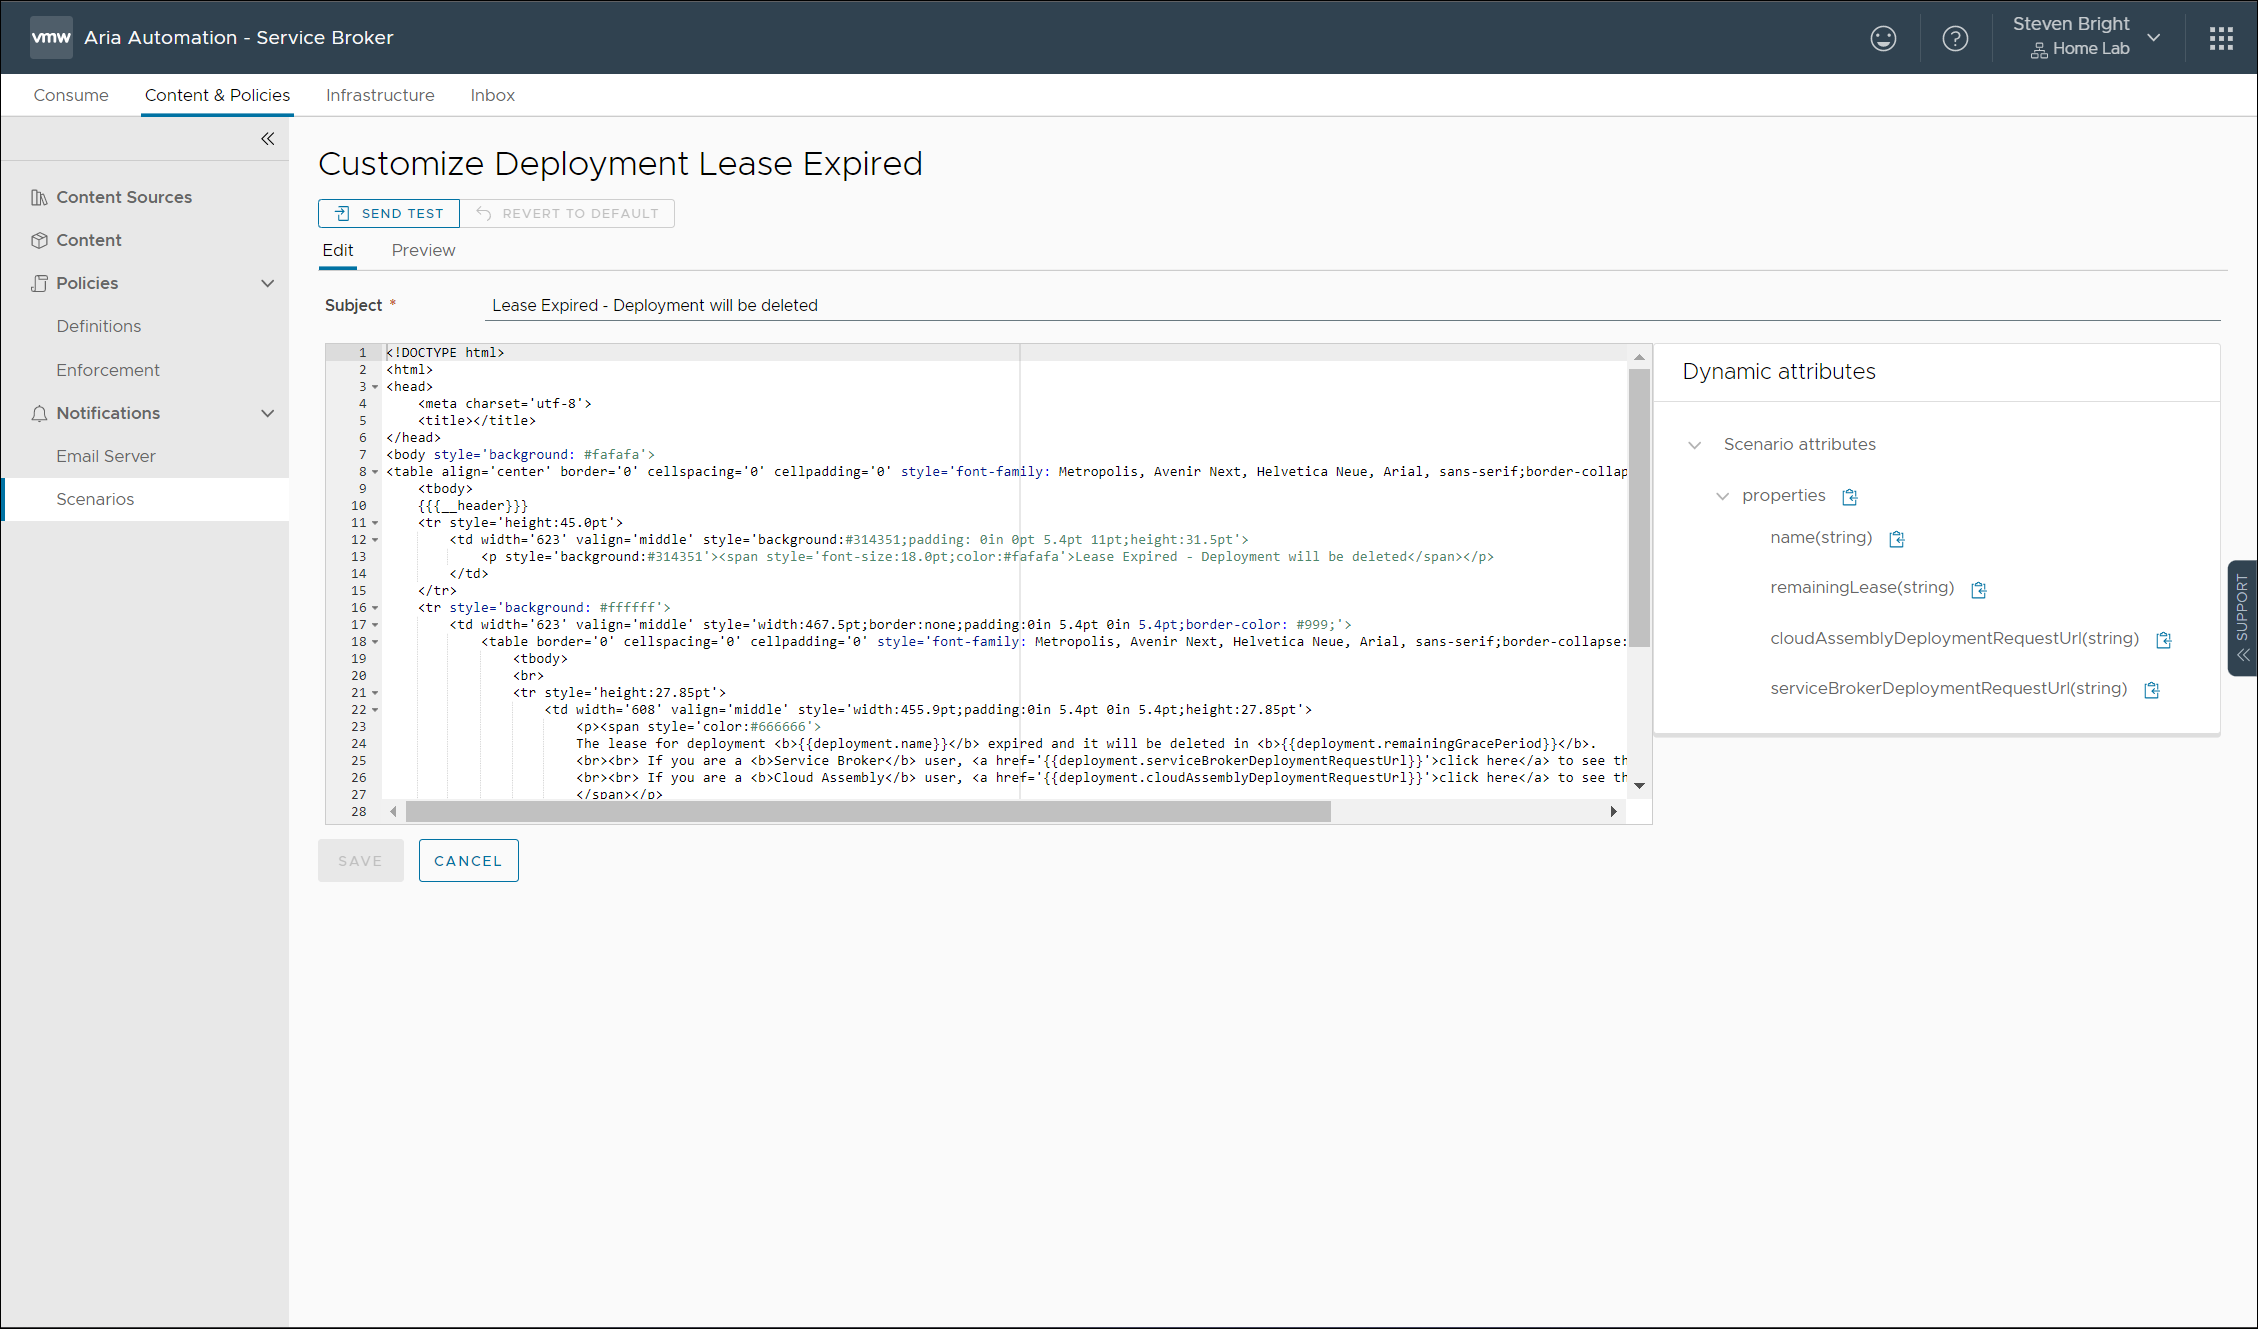 Screenshot of the new email customization form in Aria Automation Service Broker